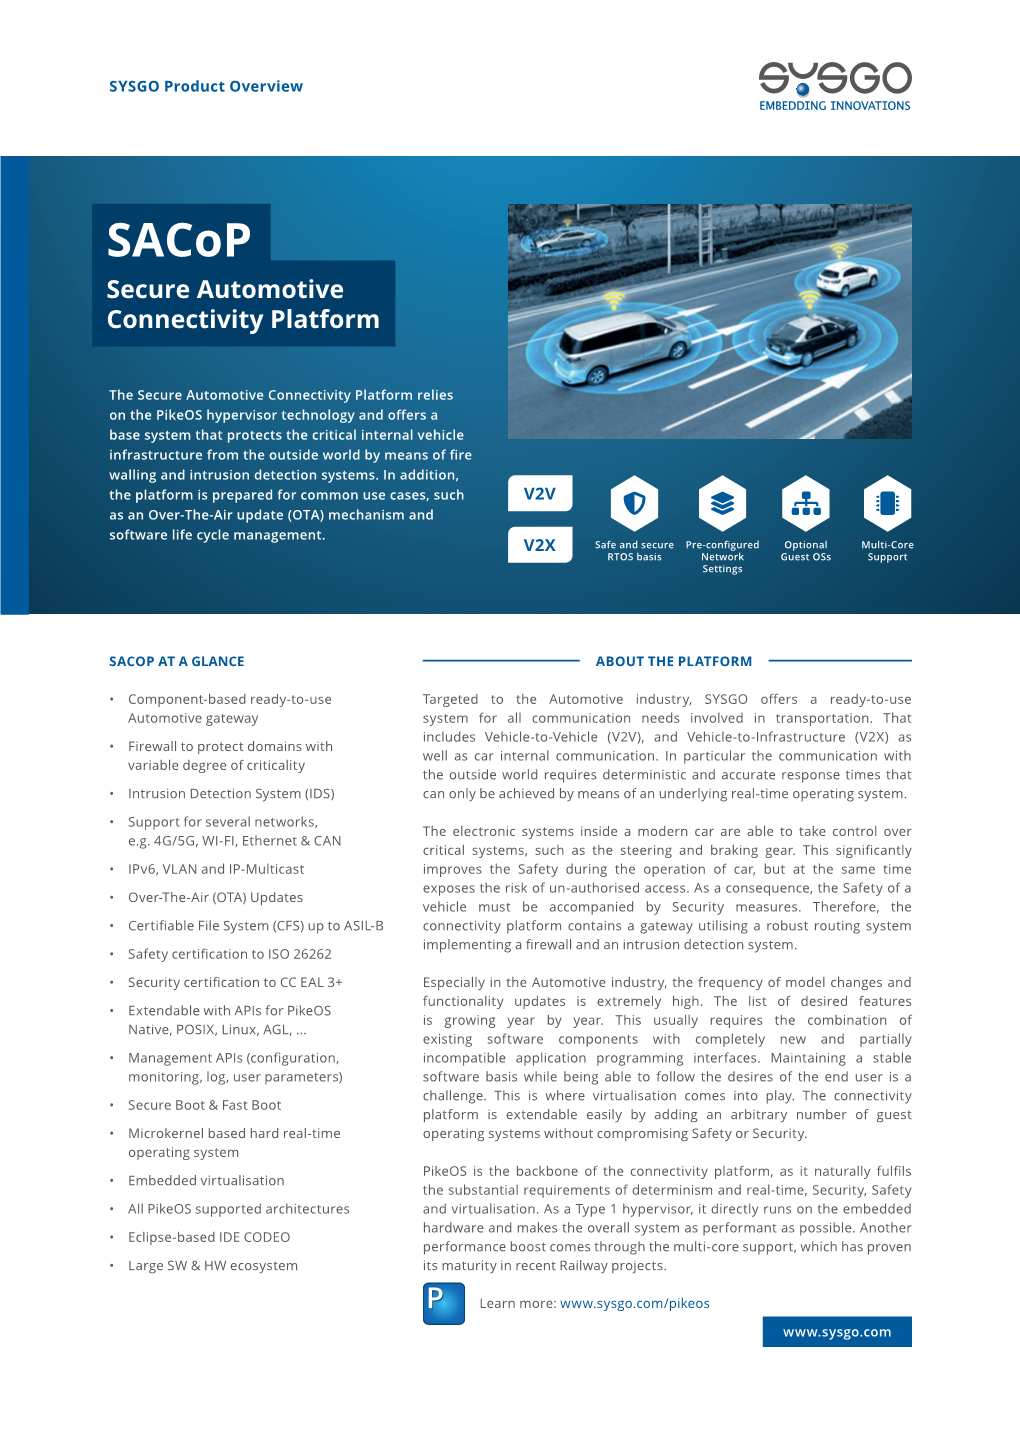 Sacop Product Overview